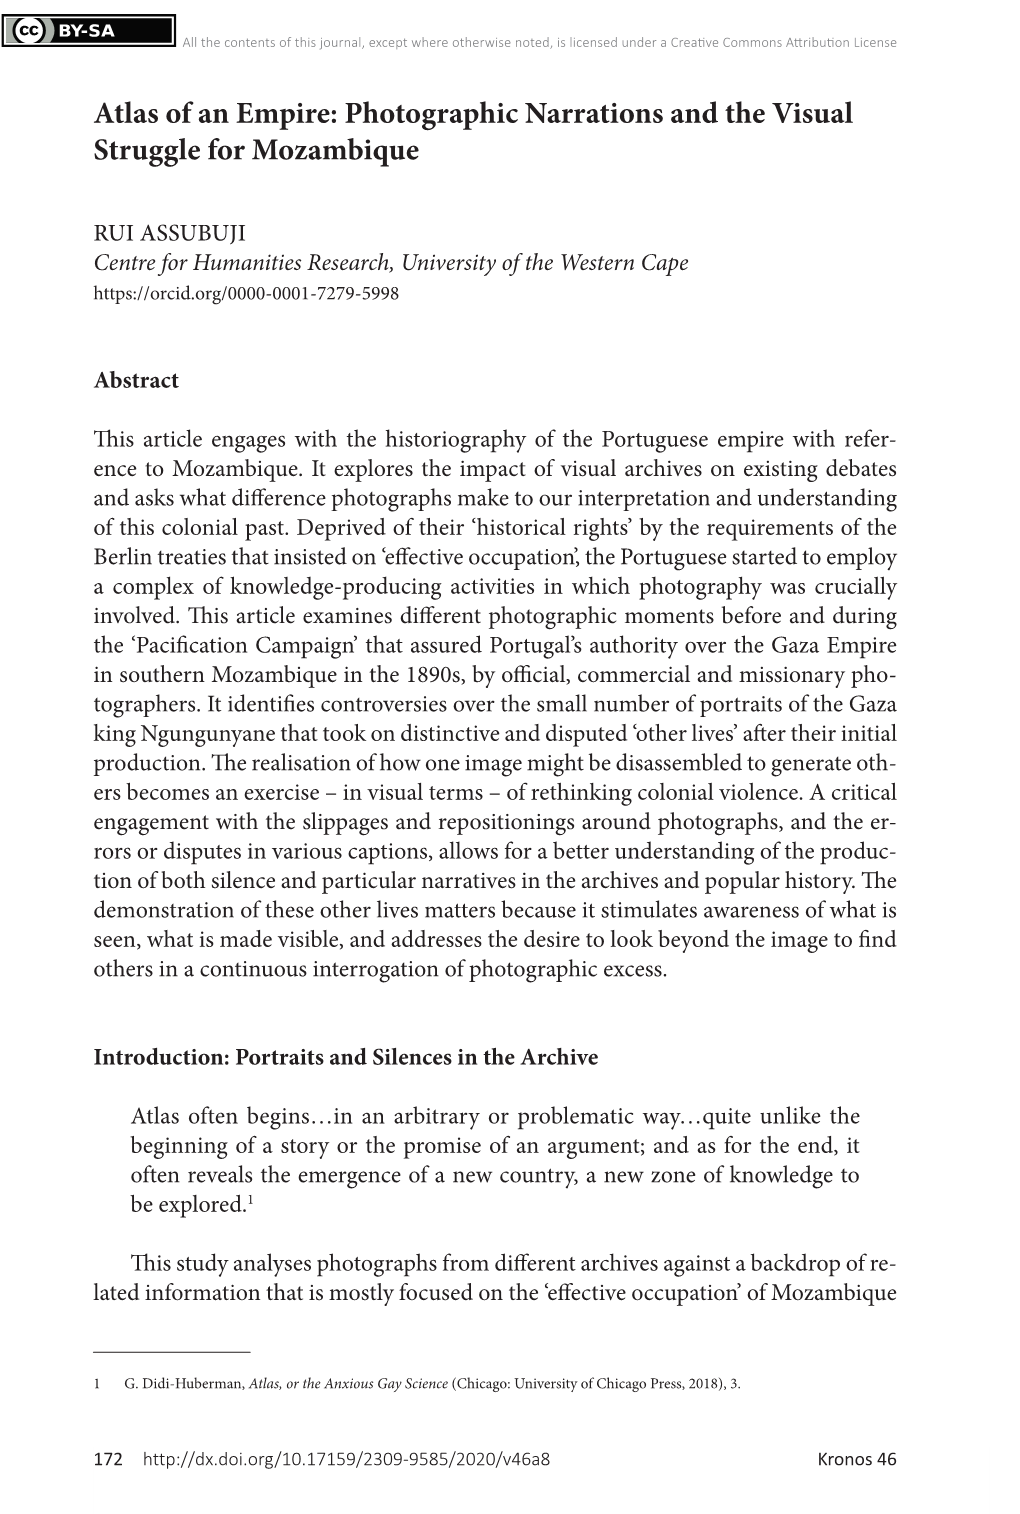 Atlas of an Empire: Photographic Narrations and the Visual Struggle for Mozambique